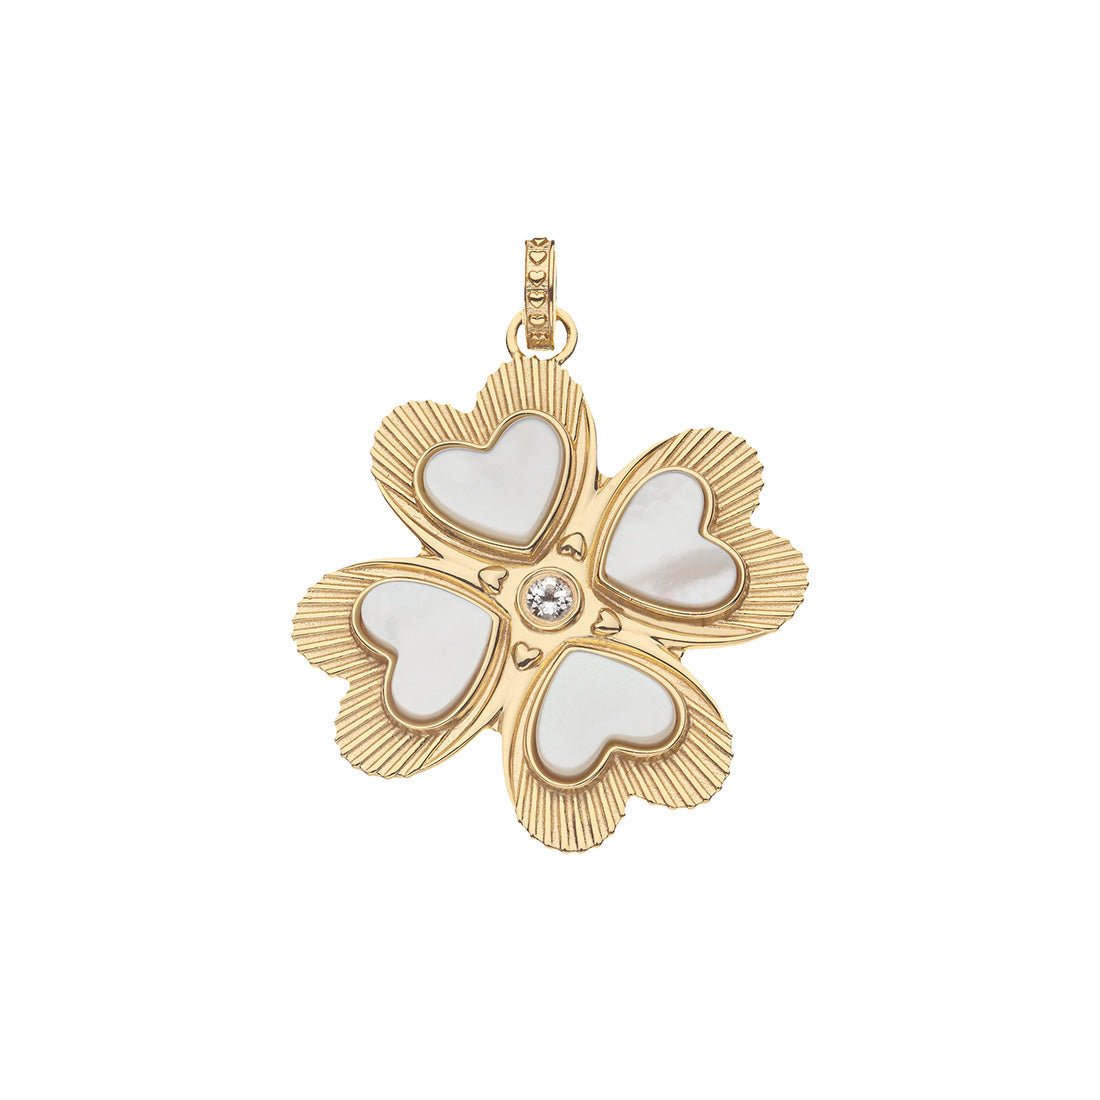 Jane Win - LUCKY in Love Clover Pendant with Mother of Pearl